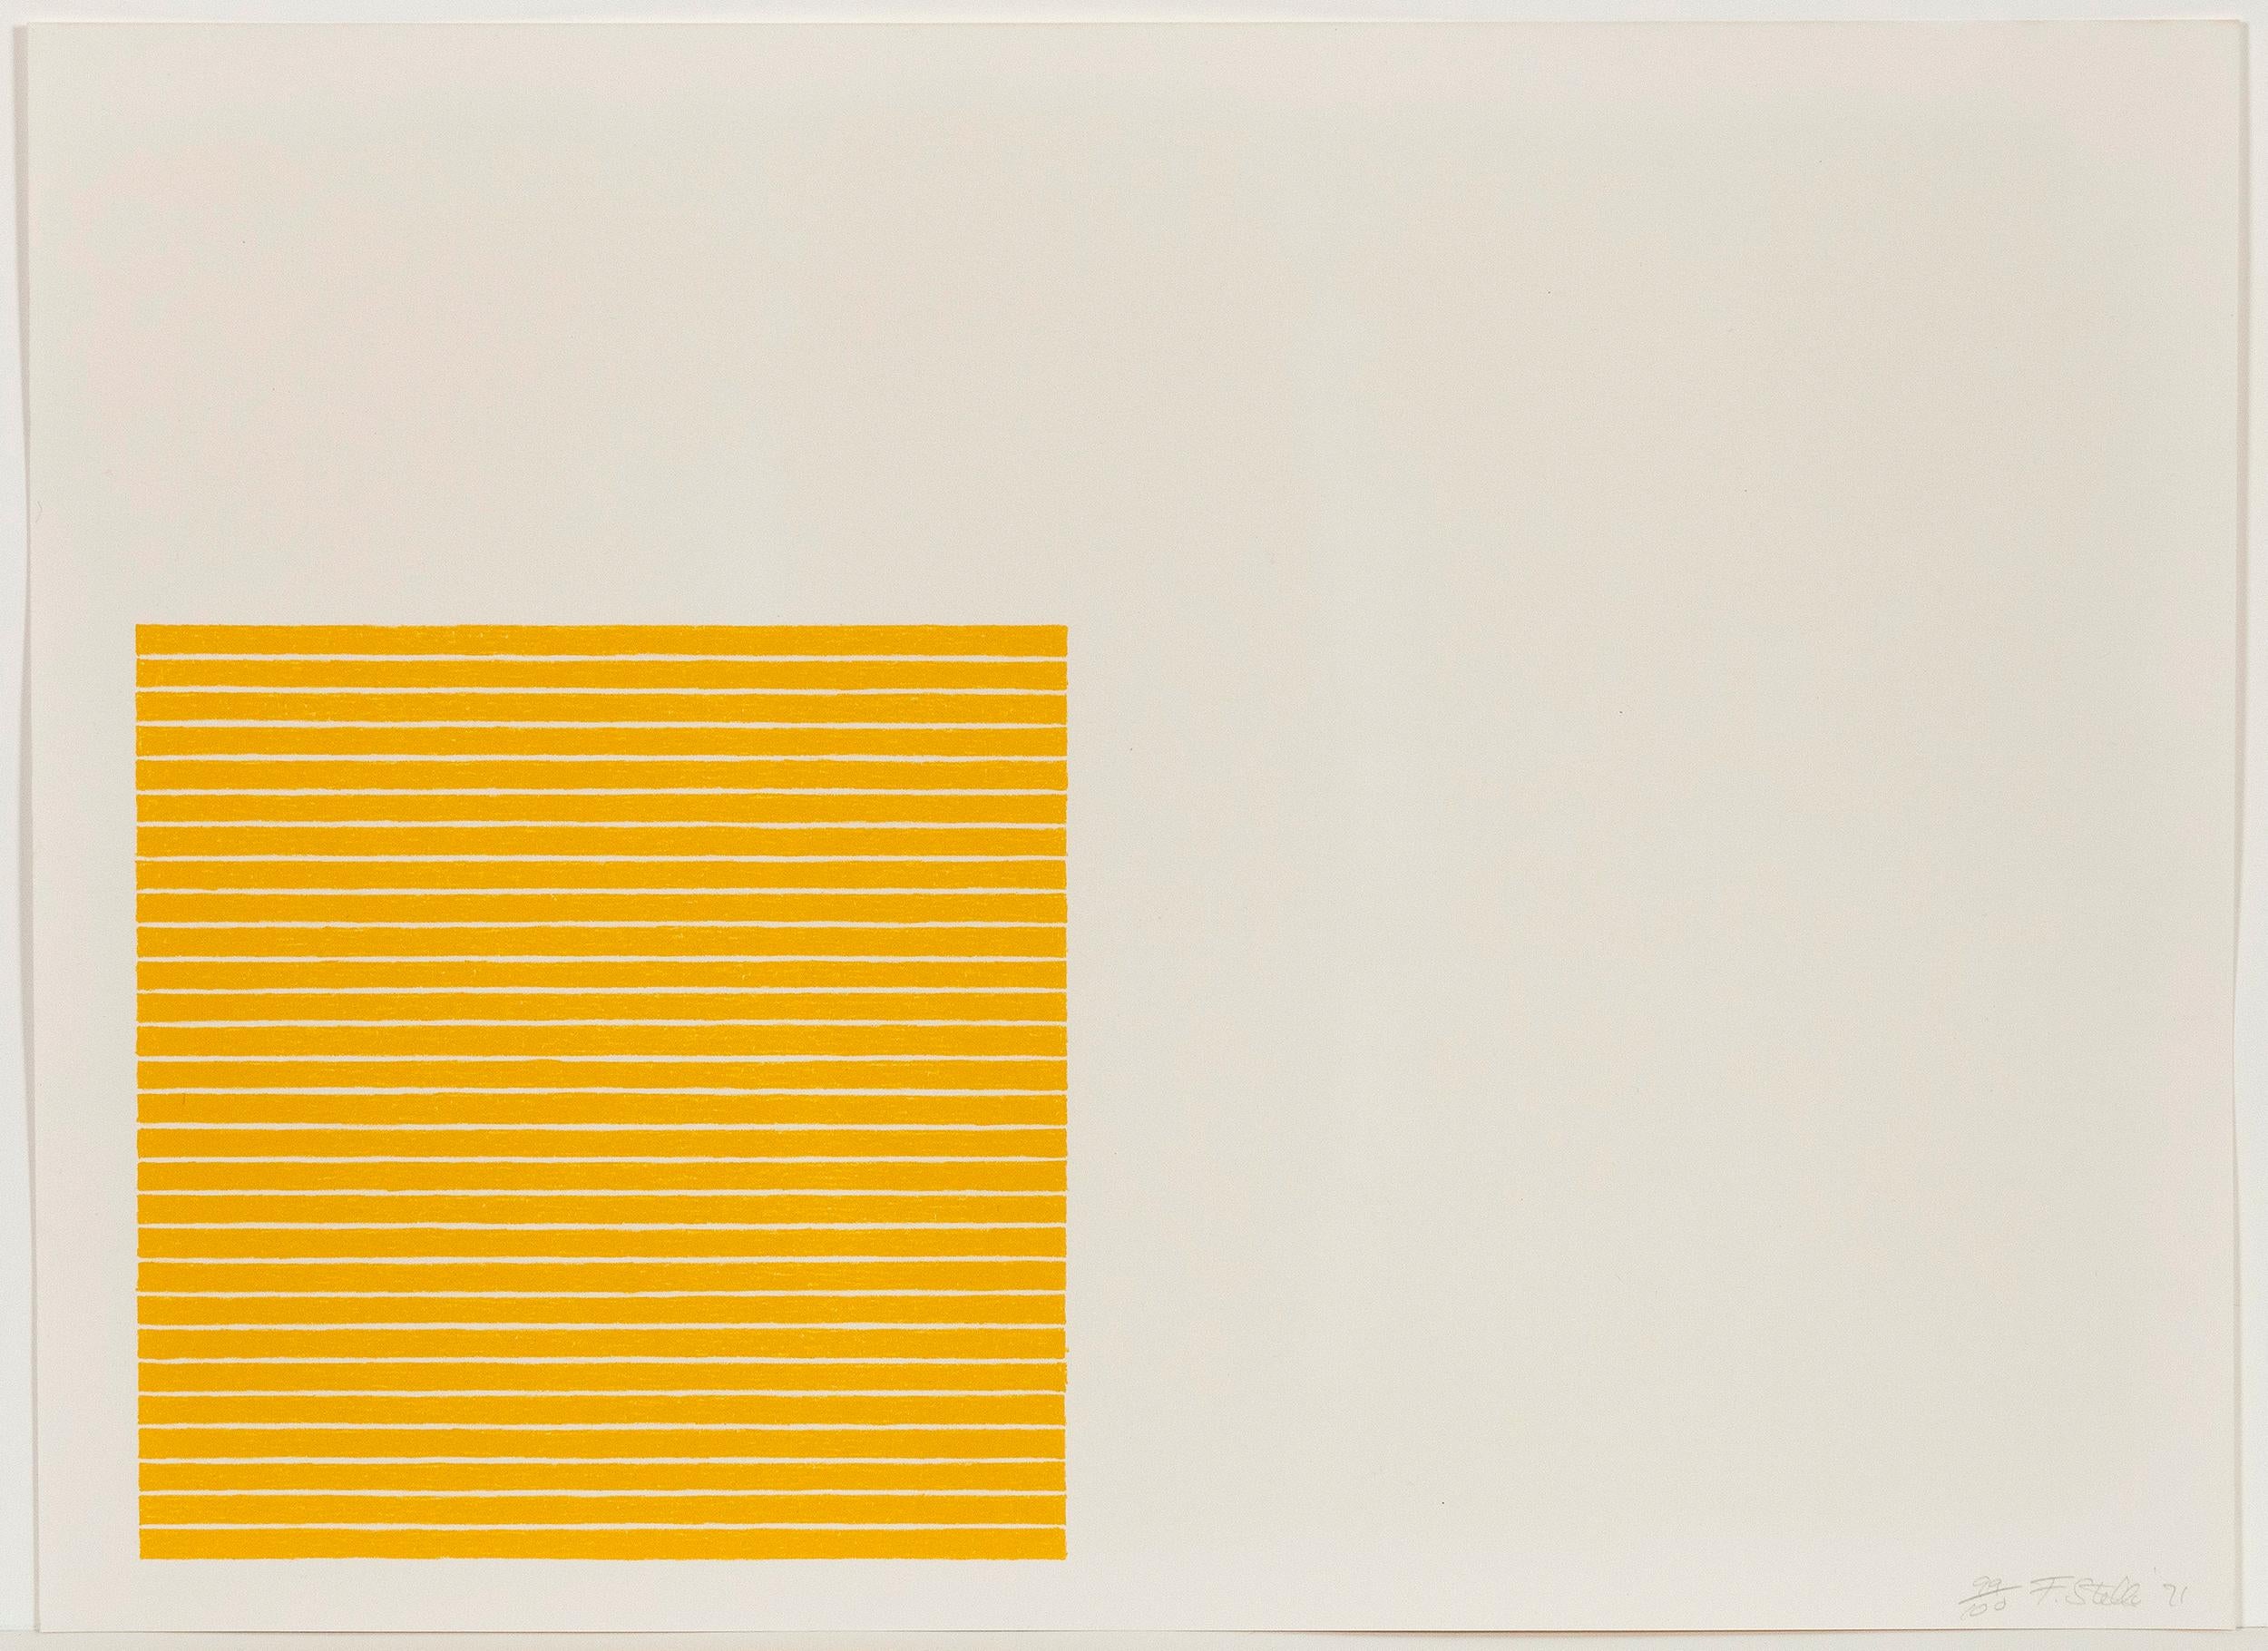 Caviar20 is excited to be offering this paradigm of Frank Stella's work; an example from his legendary 